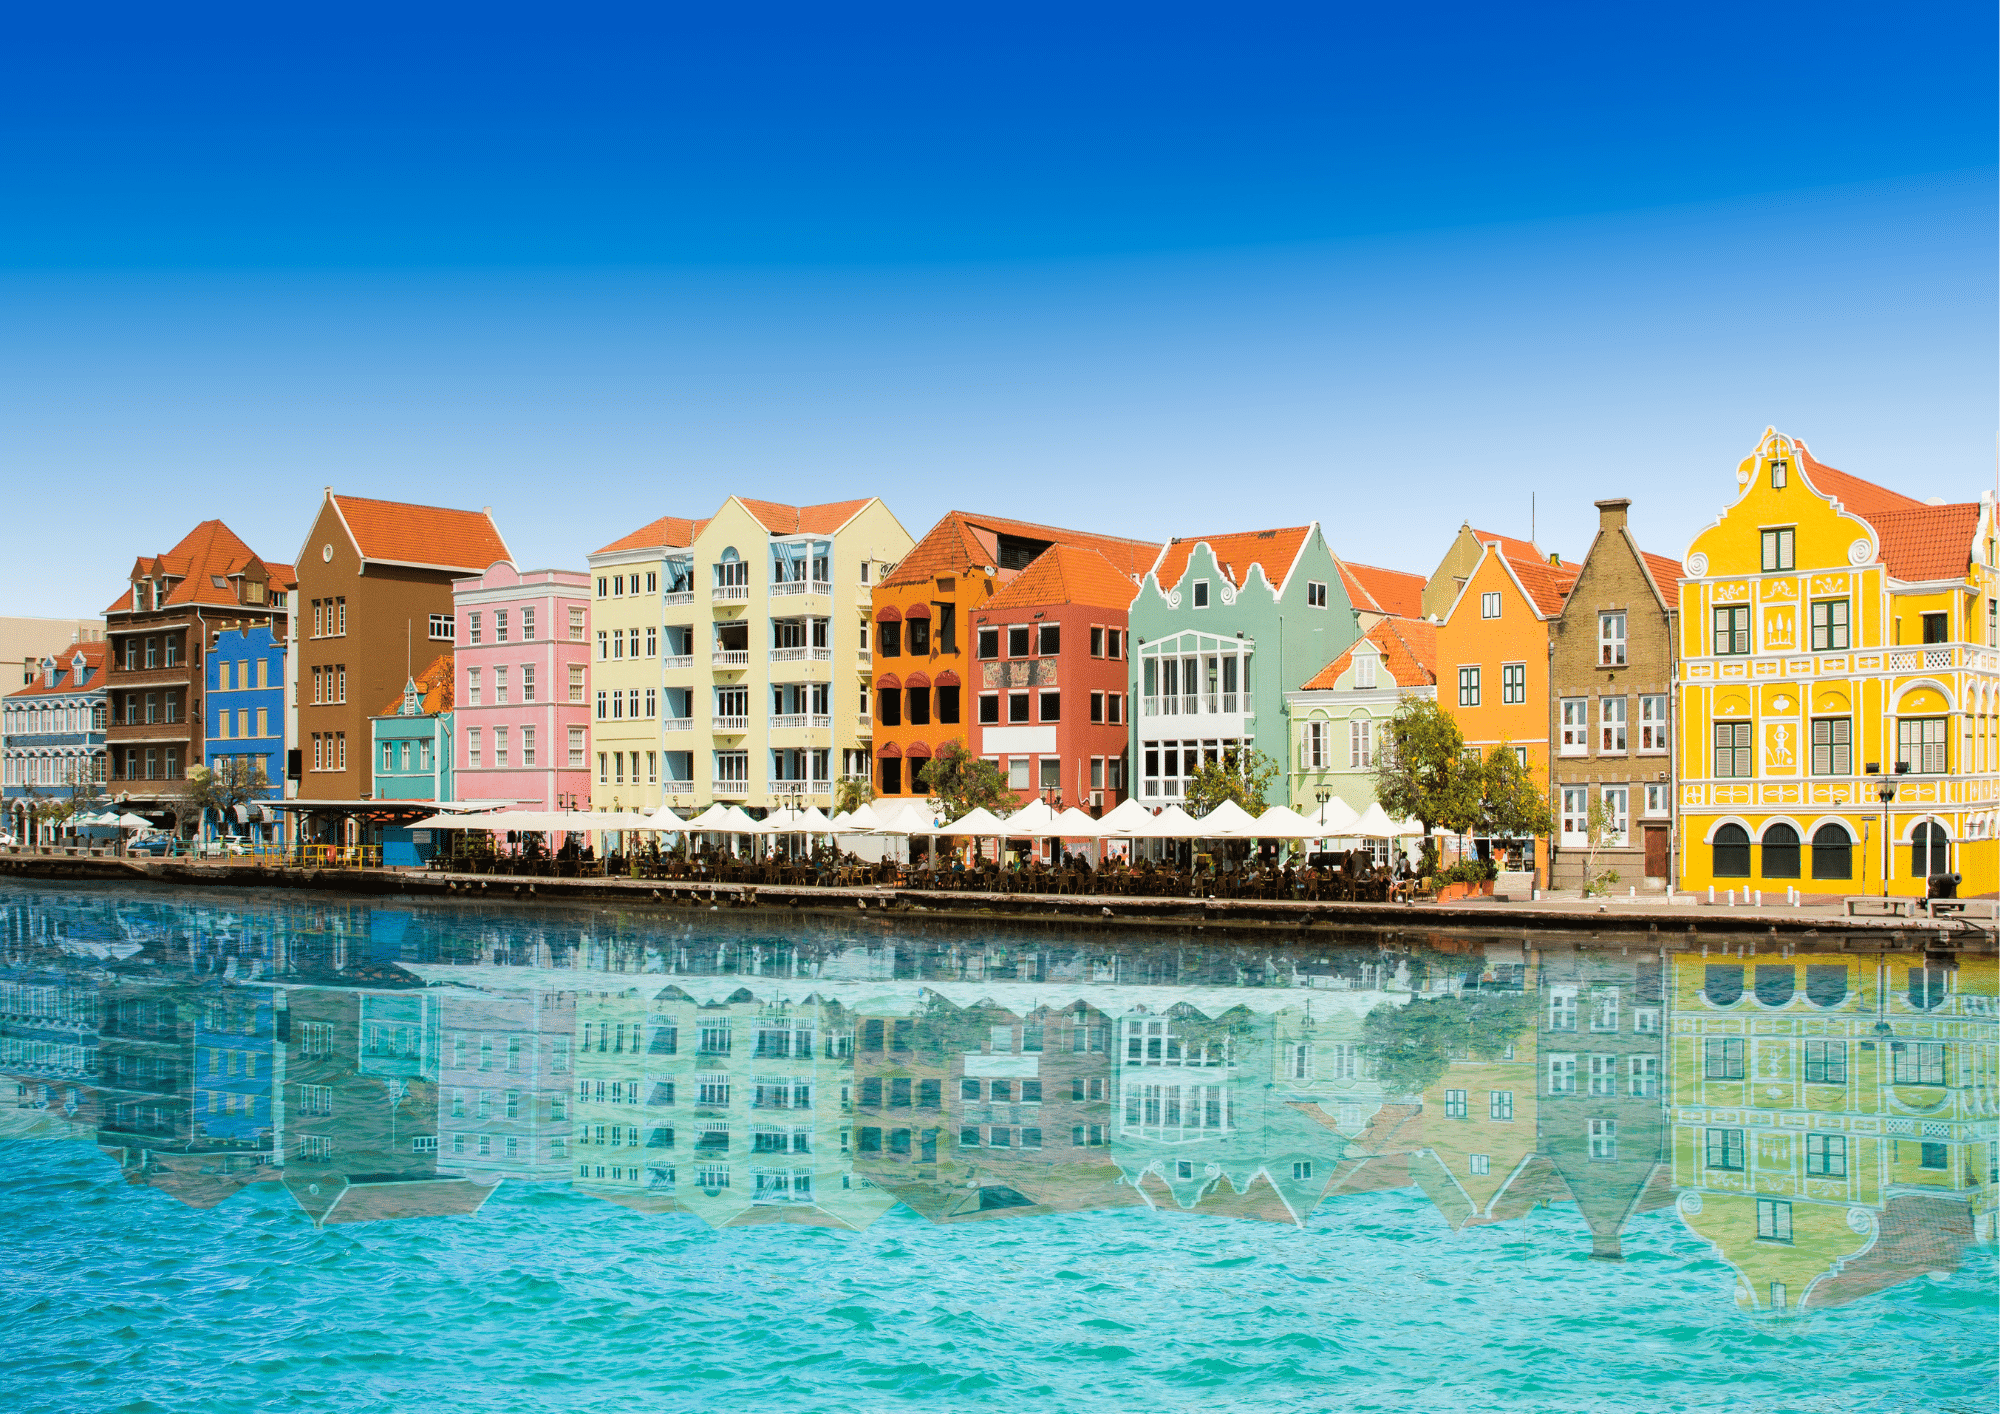 <p>Curaçao is a slice of Europe set in a Caribbean paradise. Whether you’re looking for quick and easy cruise ship excursions, to getting off the beaten path, this post has a little something for everyone who is planning to visit the delightful island of Curaçao!</p> <p><strong>Read more: <a href="https://www.have-clothes-will-travel.com/fun-things-to-do-in-curacao/" rel="noreferrer noopener">50+ Fun Things to Do in Curaçao in 2023 for an Epic Vacation</a></strong></p>